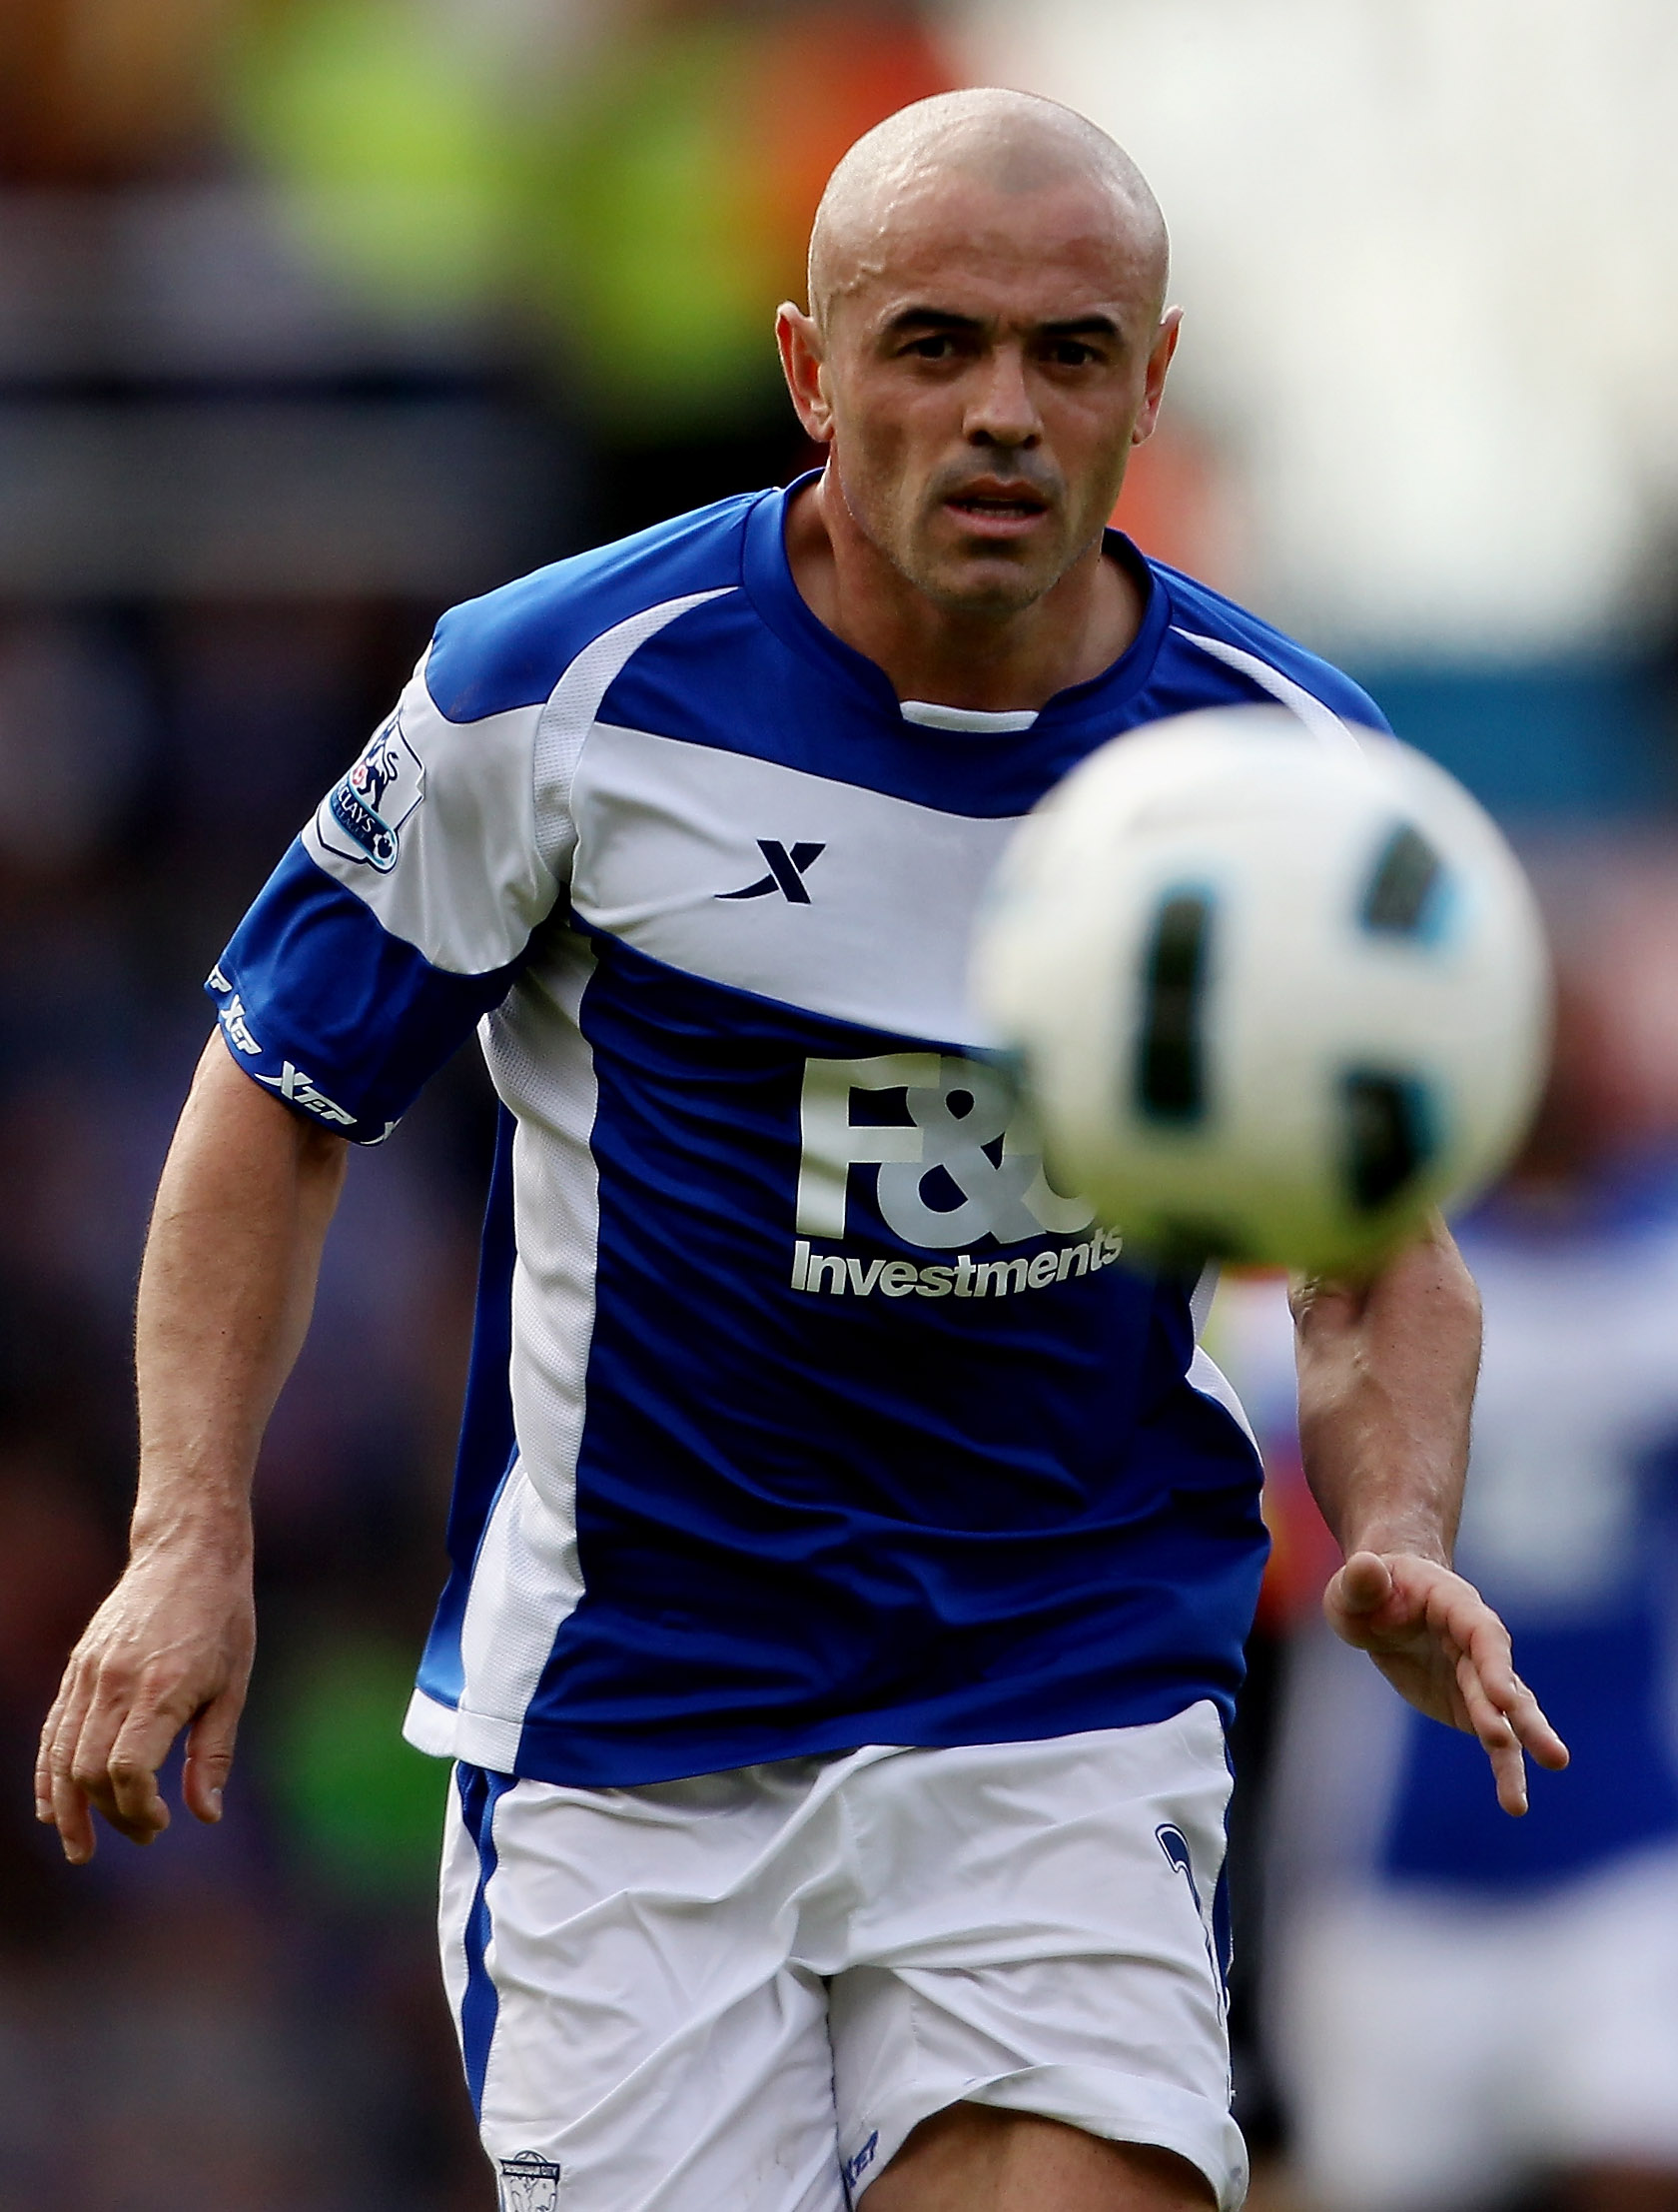 BIRMINGHAM, ENGLAND - APRIL 02:  Stephen Carr of Birmingham eyes the ball during the Barclays Premier League match between Birmingham City and Bolton Wanderers at St.Andrews on April 2, 2011 in Birmingham, England.  (Photo by Scott Heavey/Getty Images)